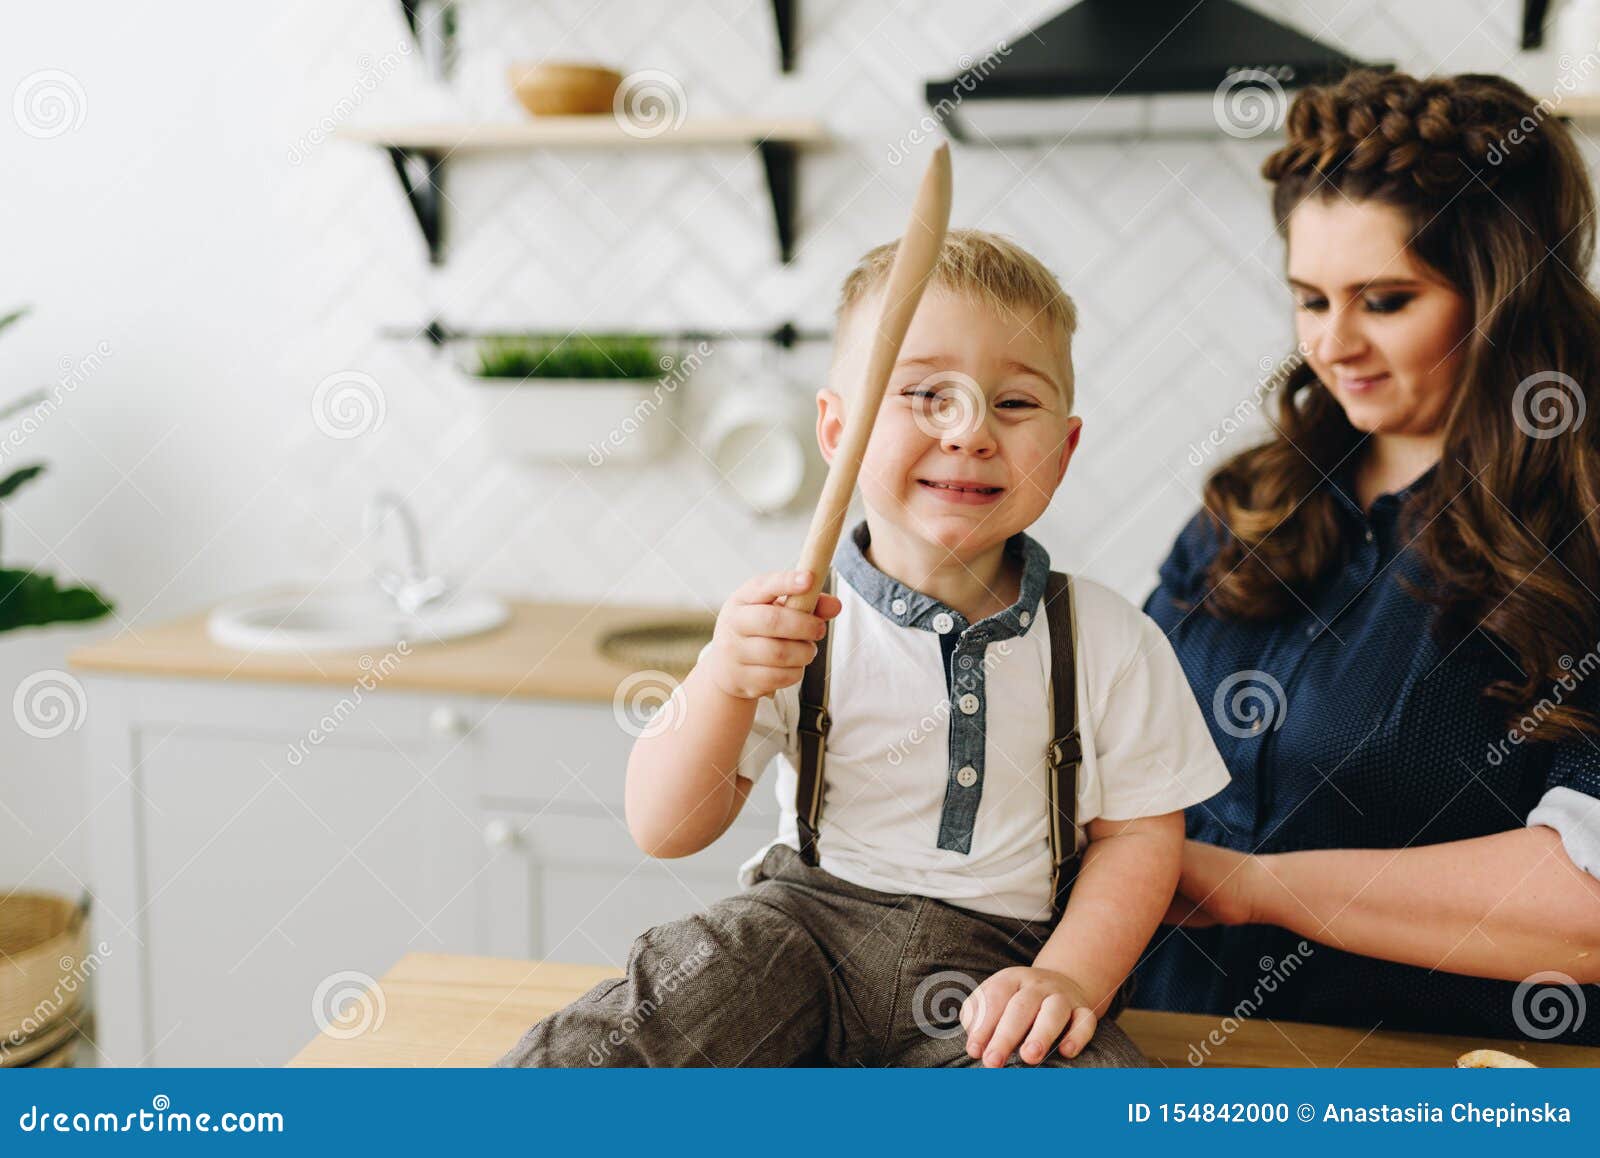 https://thumbs.dreamstime.com/z/little-boy-sitting-kitchen-table-playing-kitchen-tool-smiling-happily-his-mother-behind-him-little-154842000.jpg